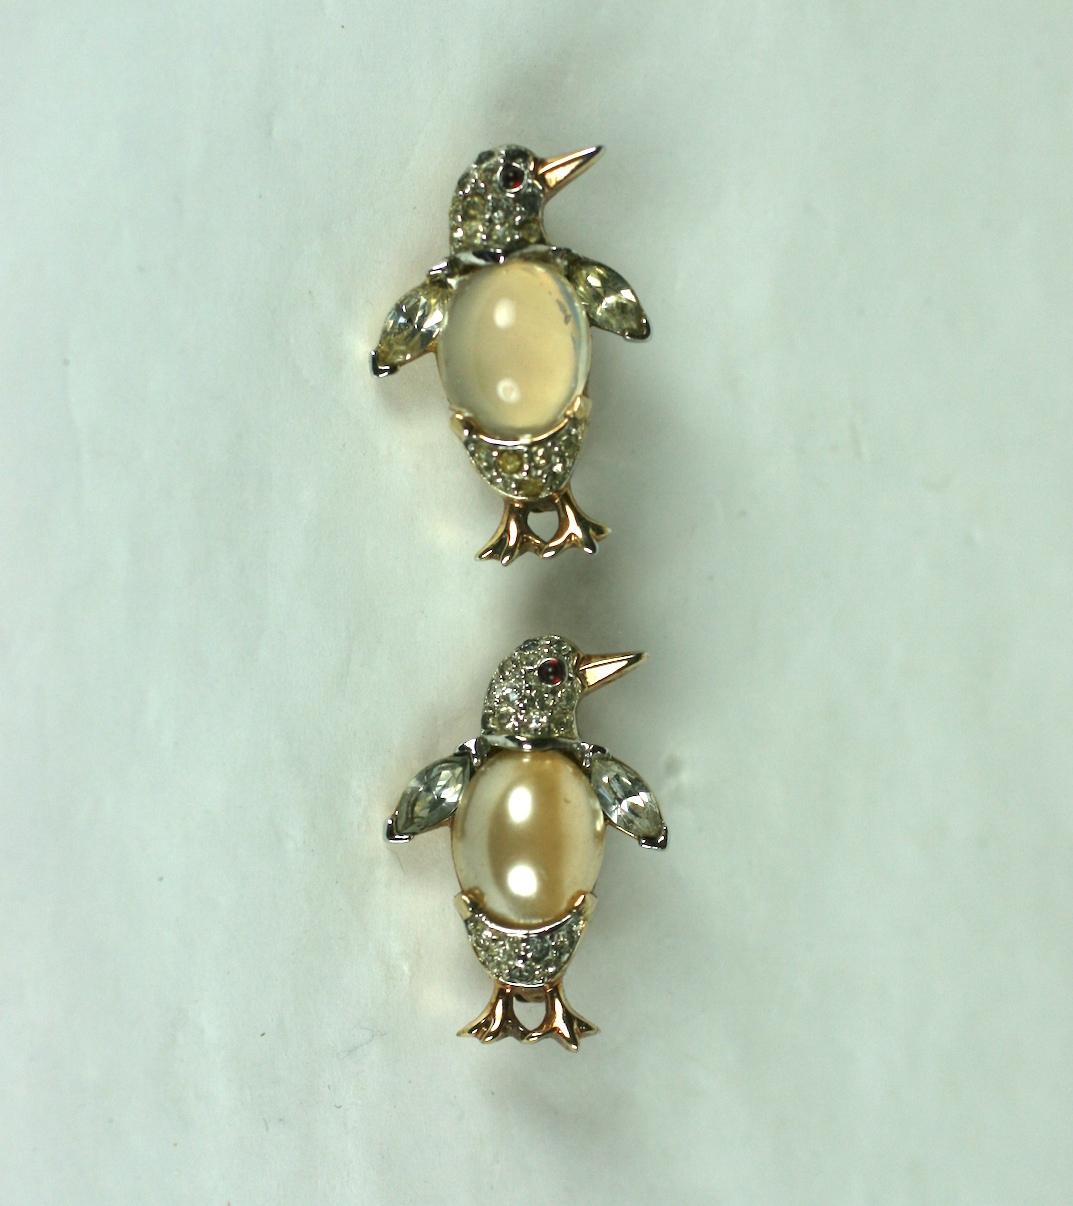 Alfred Philippe for Trifari crystal pave miniature pearl and jelly belly penguin brooches. Set in gold plated rhodium metal with minute ruby cabochons and crystal marquise accents. 
Two brooches which are available separately. One is a pearl belly